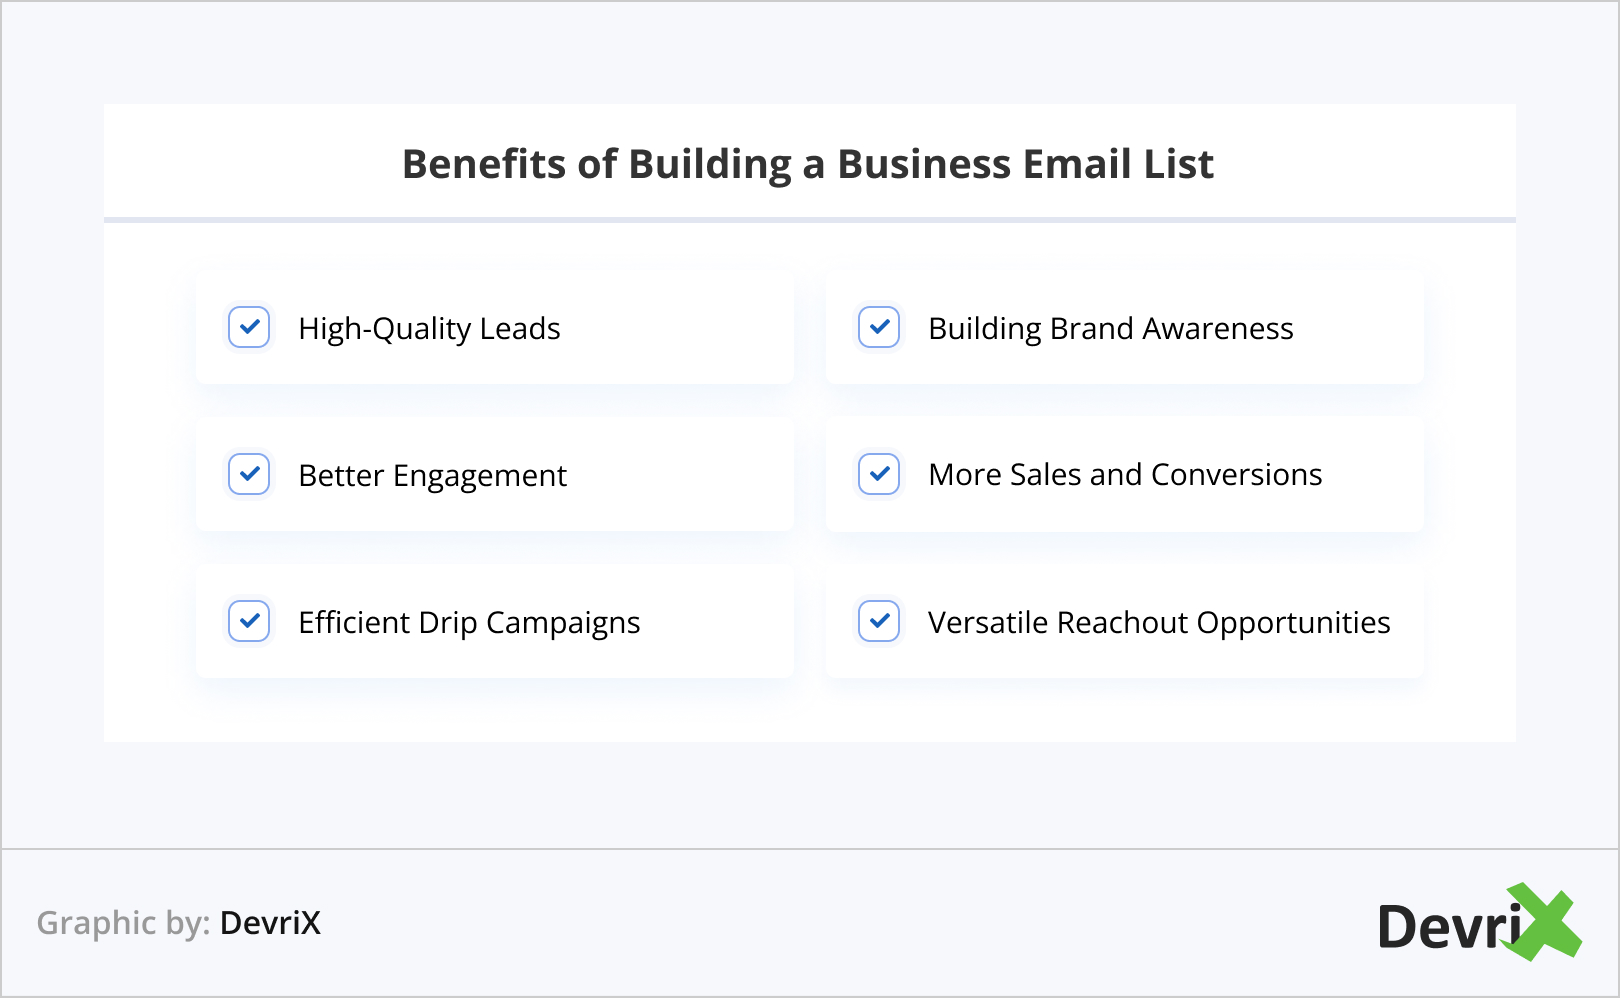 Benefits of Building a Business Email List